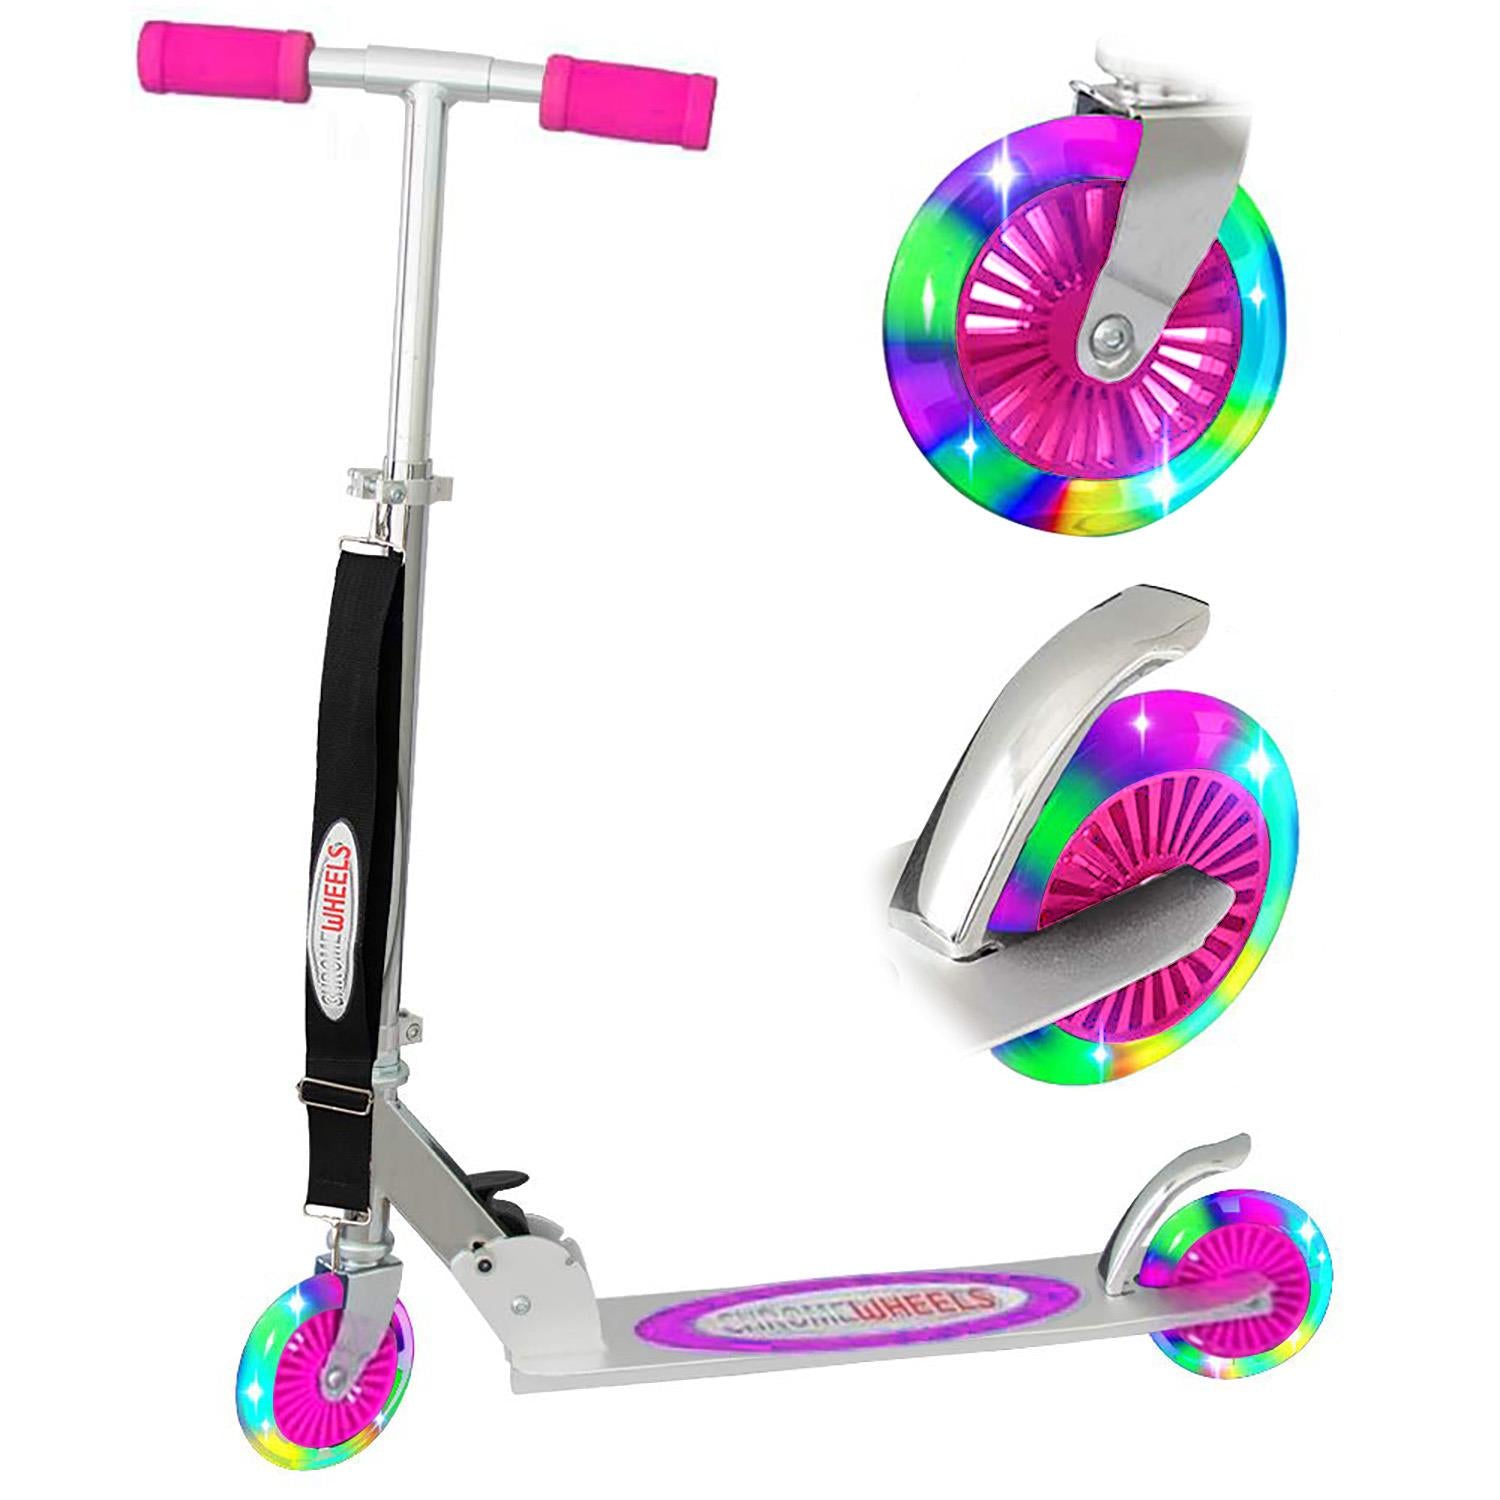 Foldable Kids Scooter Pink by The Magic Toy Shop - The Magic Toy Shop